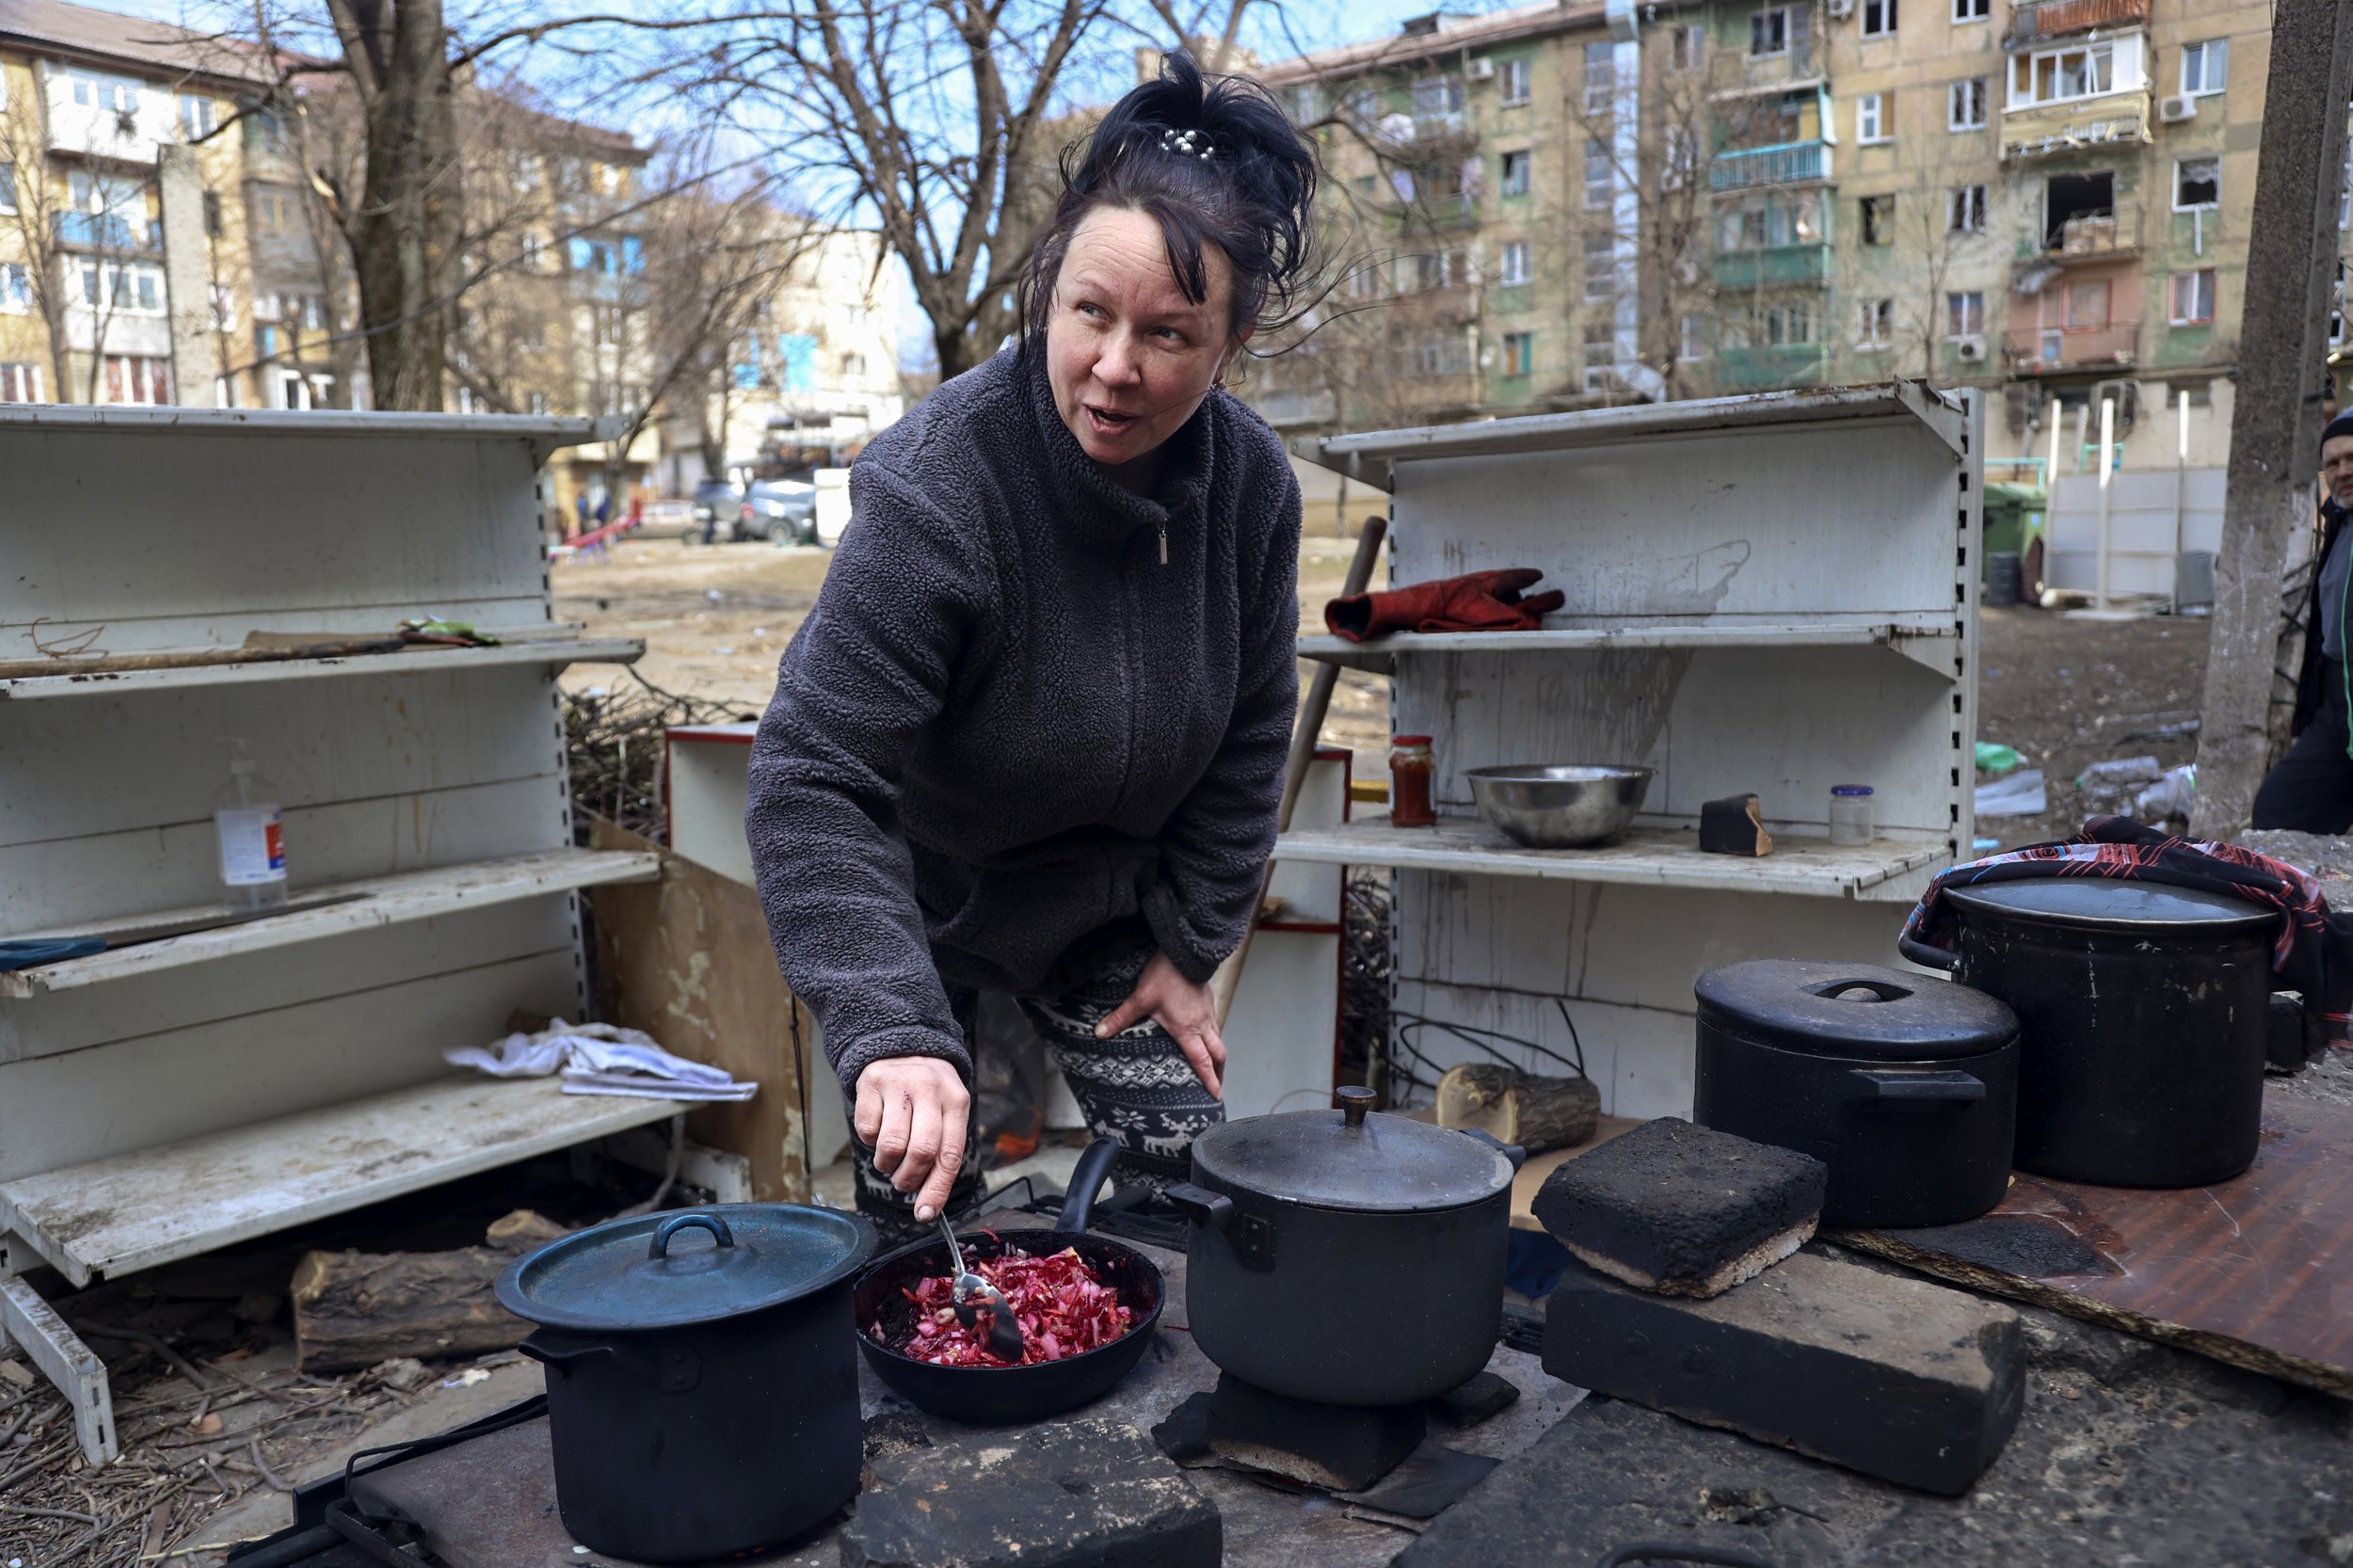  A woman cooks in a yard of apartment buildings damaged by shelling from fighting on the outskirts of Mariupol, Ukraine, in territory under control of the separatist government of the Donetsk People's Republic, on Tuesday, March 29, 2022. (AP Photo/A